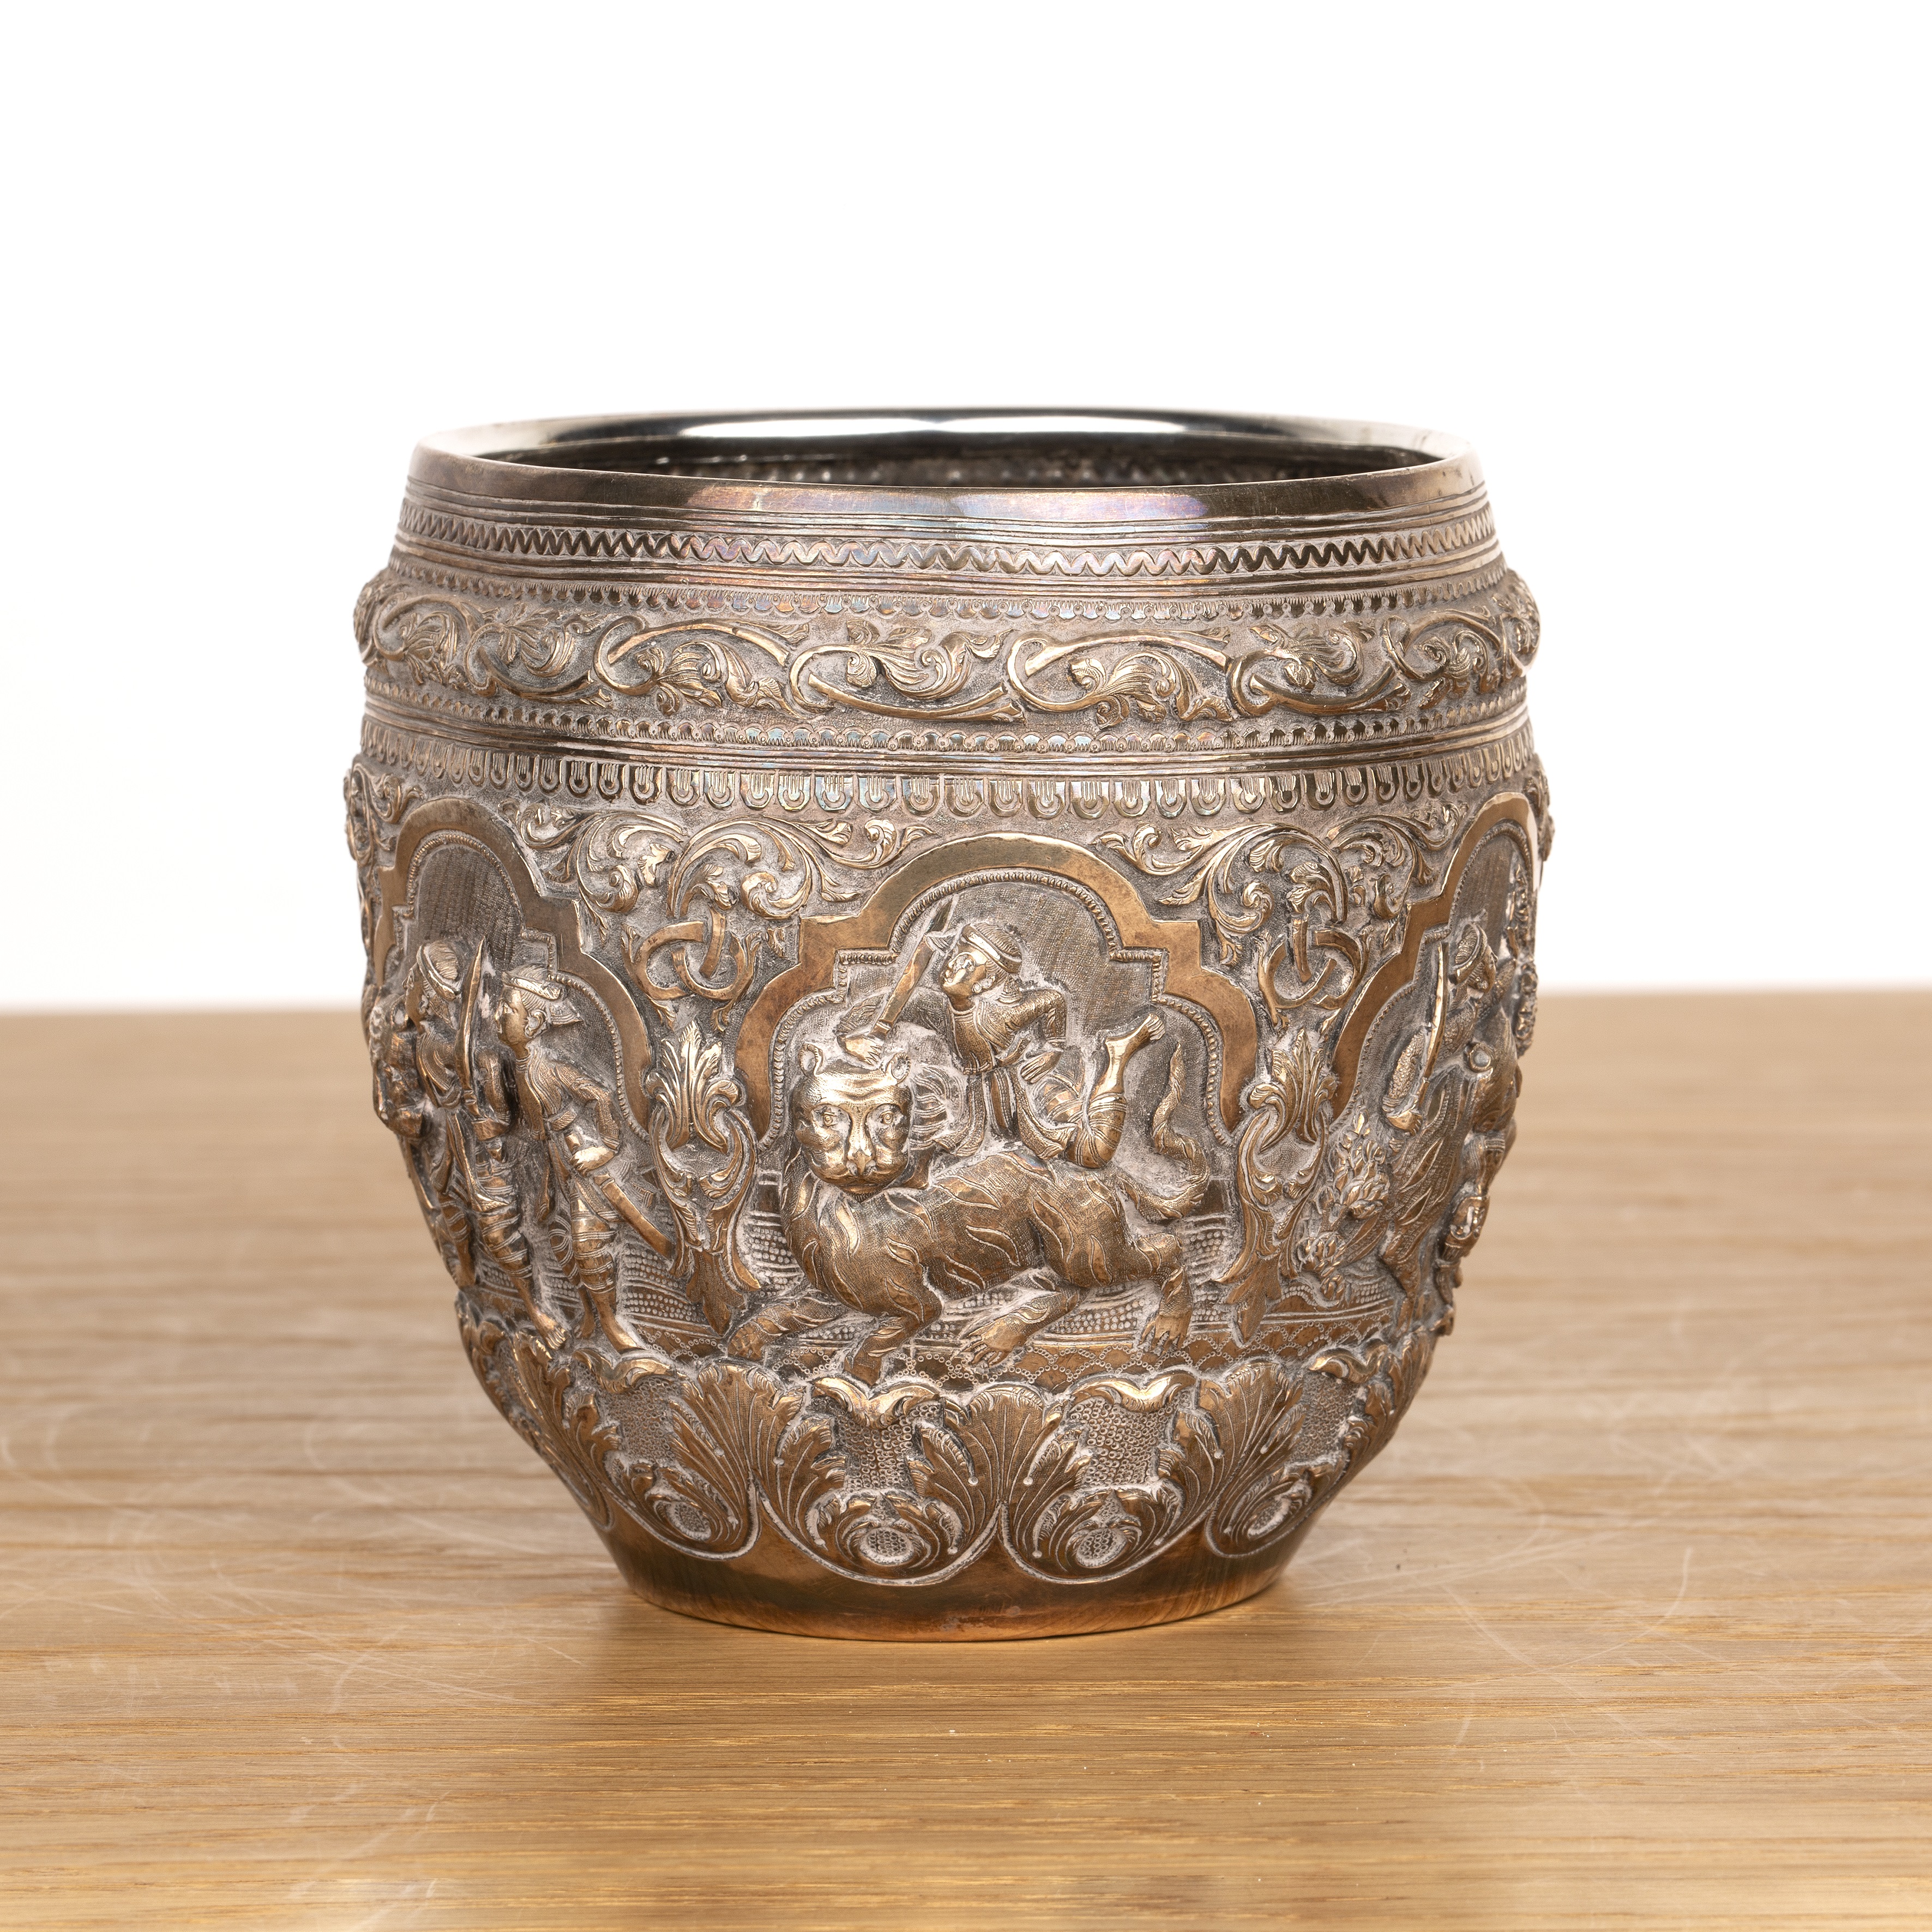 Silver repousse thabiek bowl Burmese, late 19th Century with scenes from Burmese folklore set